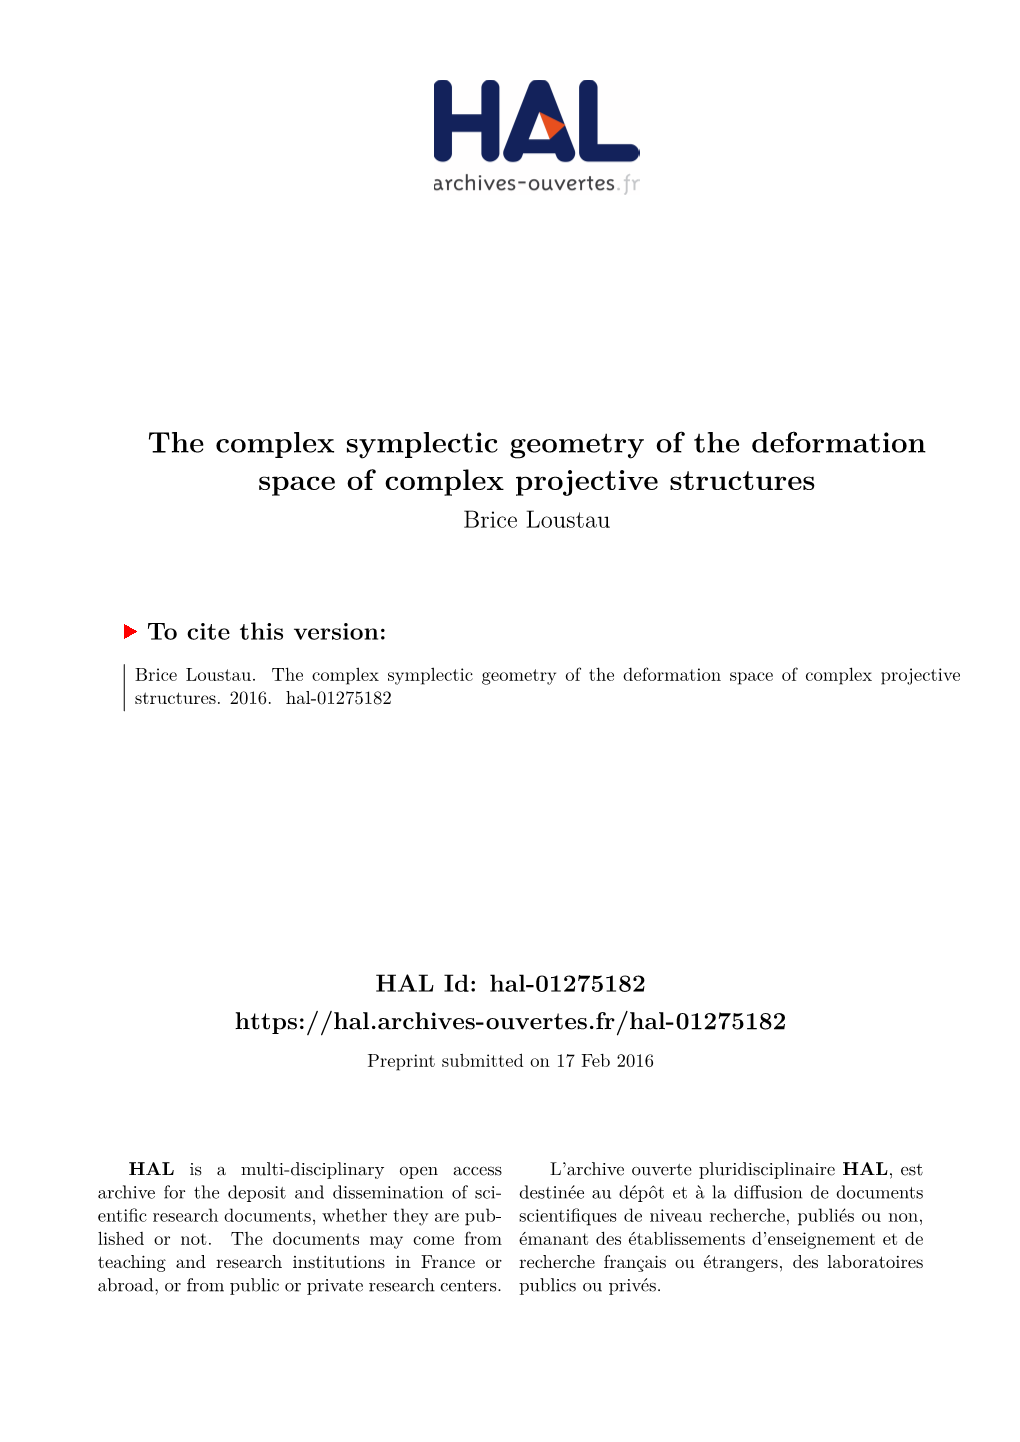 The Complex Symplectic Geometry of the Deformation Space of Complex Projective Structures Brice Loustau